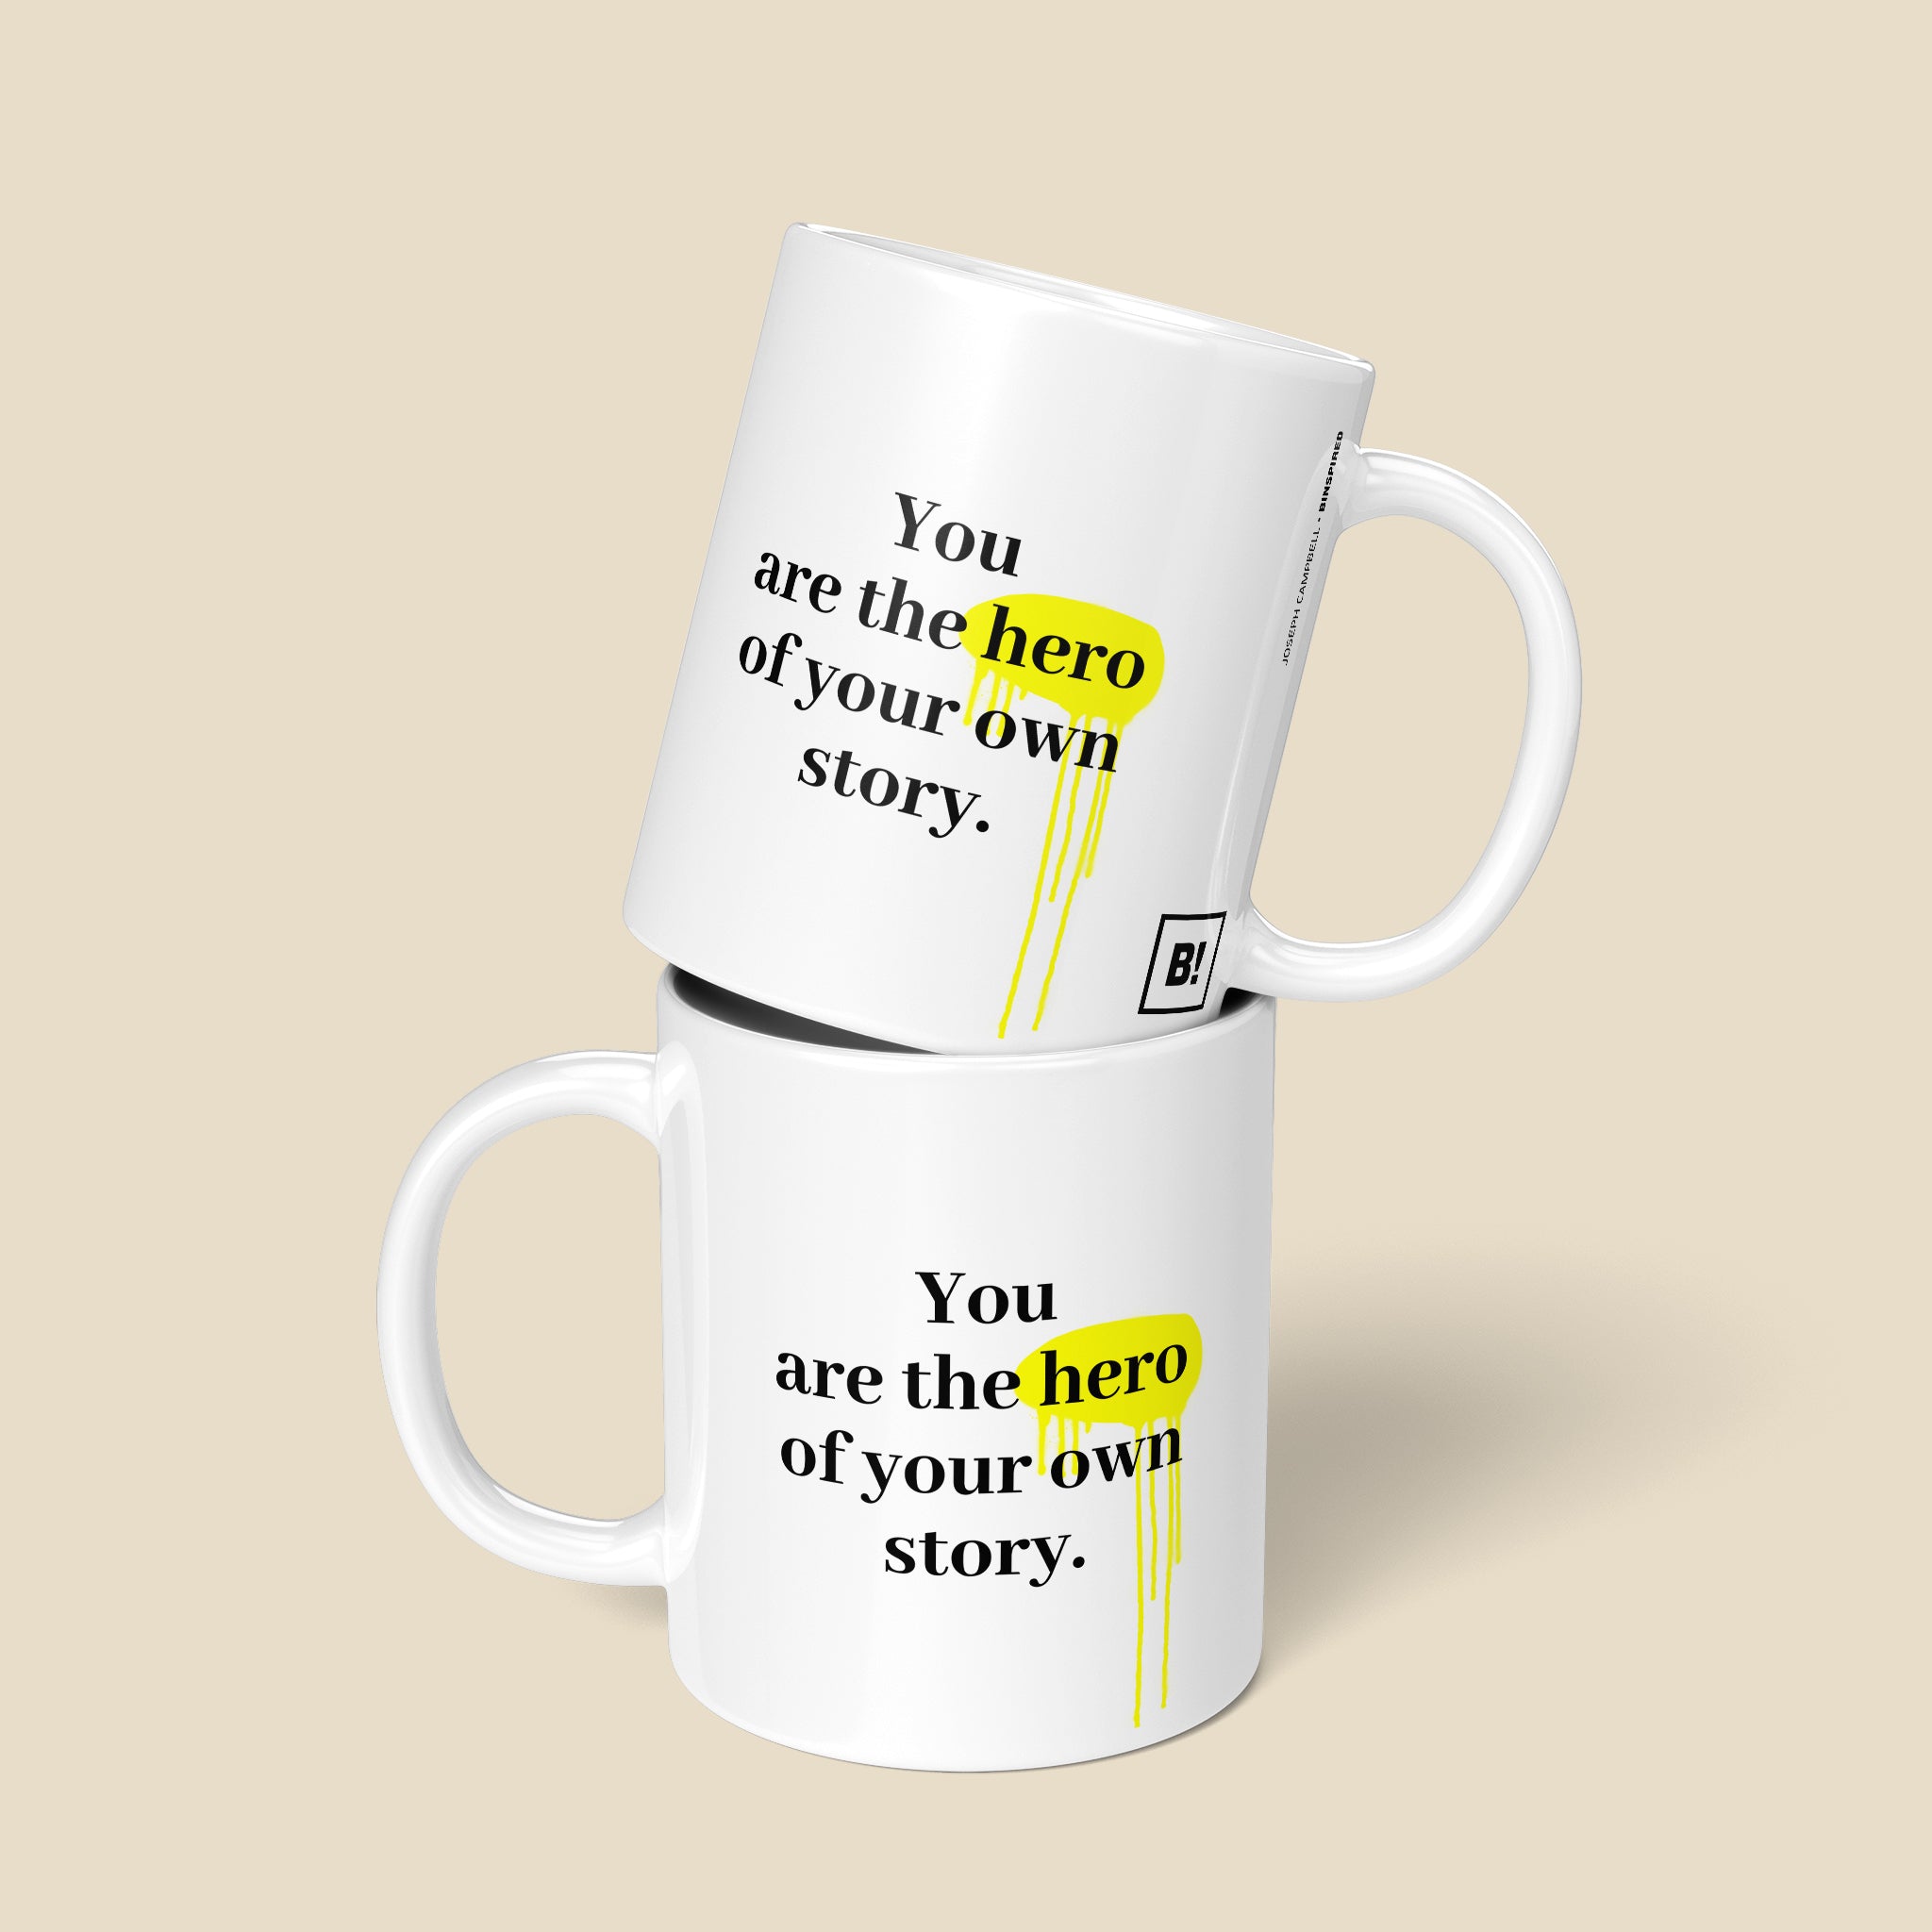 Be inspired by Oprah Winfrey's famous quote, "You get in life what you have the courage to ask for" on this 11oz white glossy coffee mug with a front and back view.